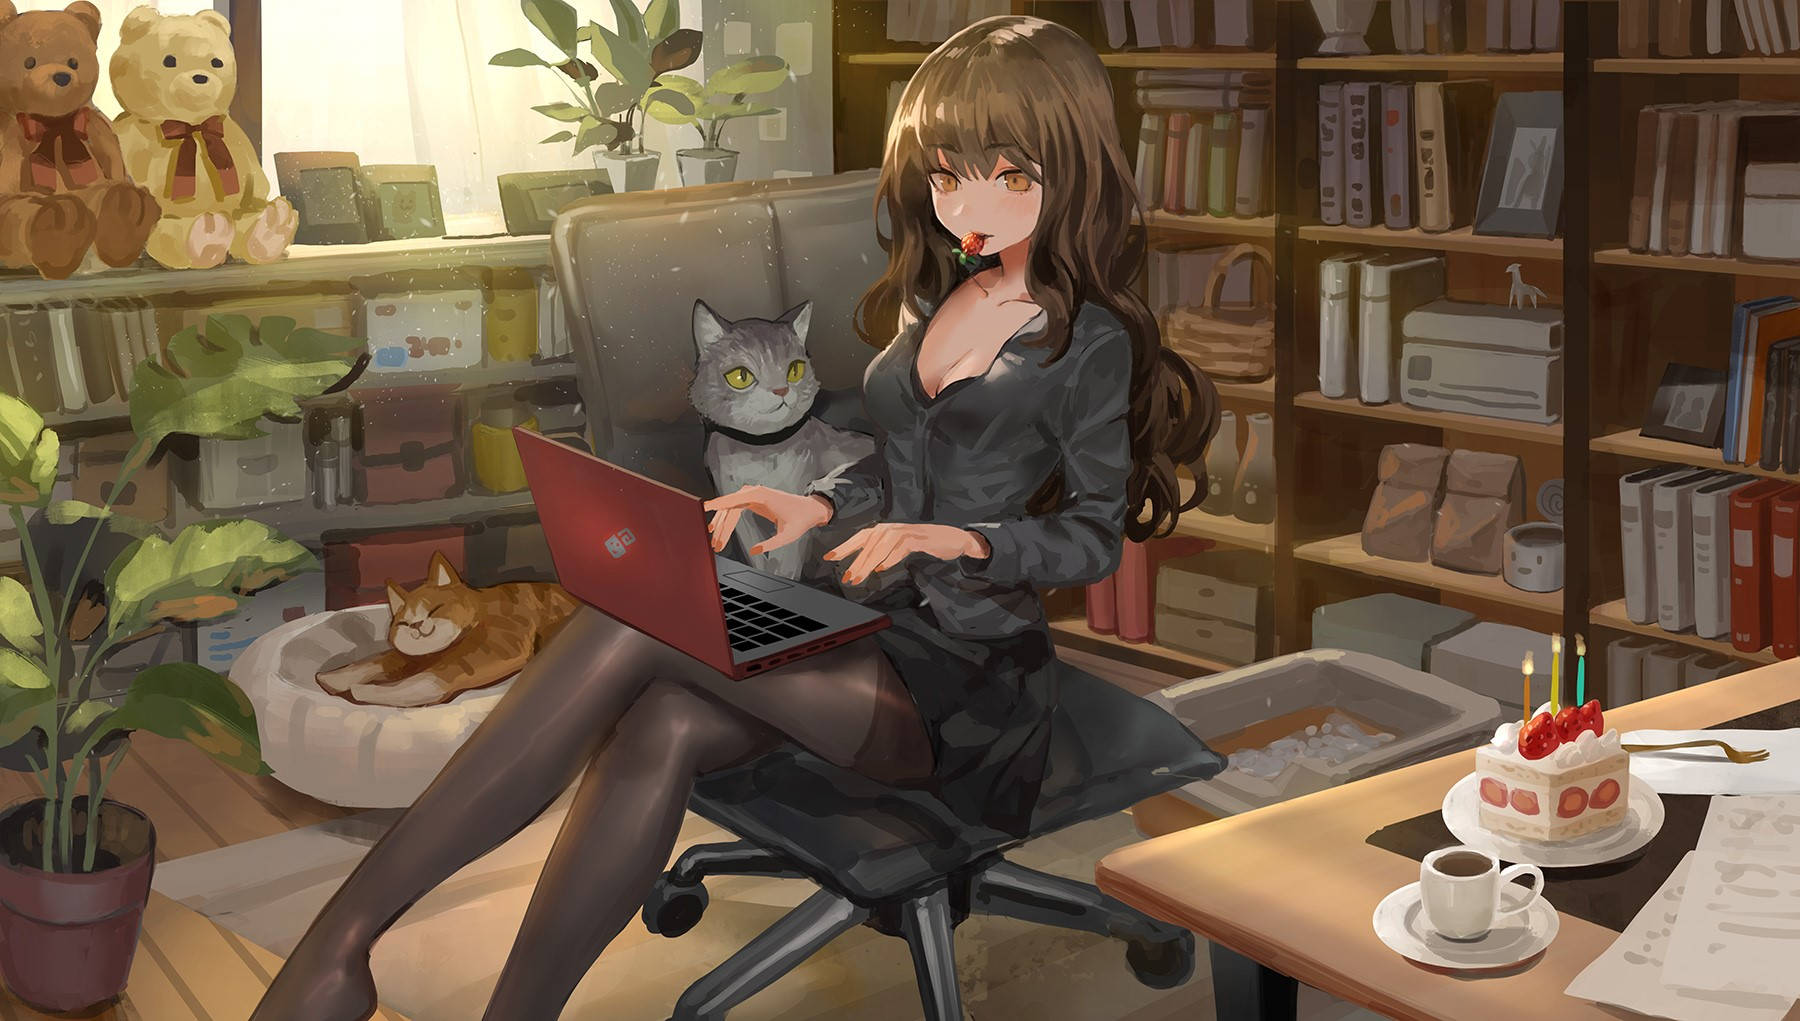 Sexy Goth Anime Girl Typing On Laptop